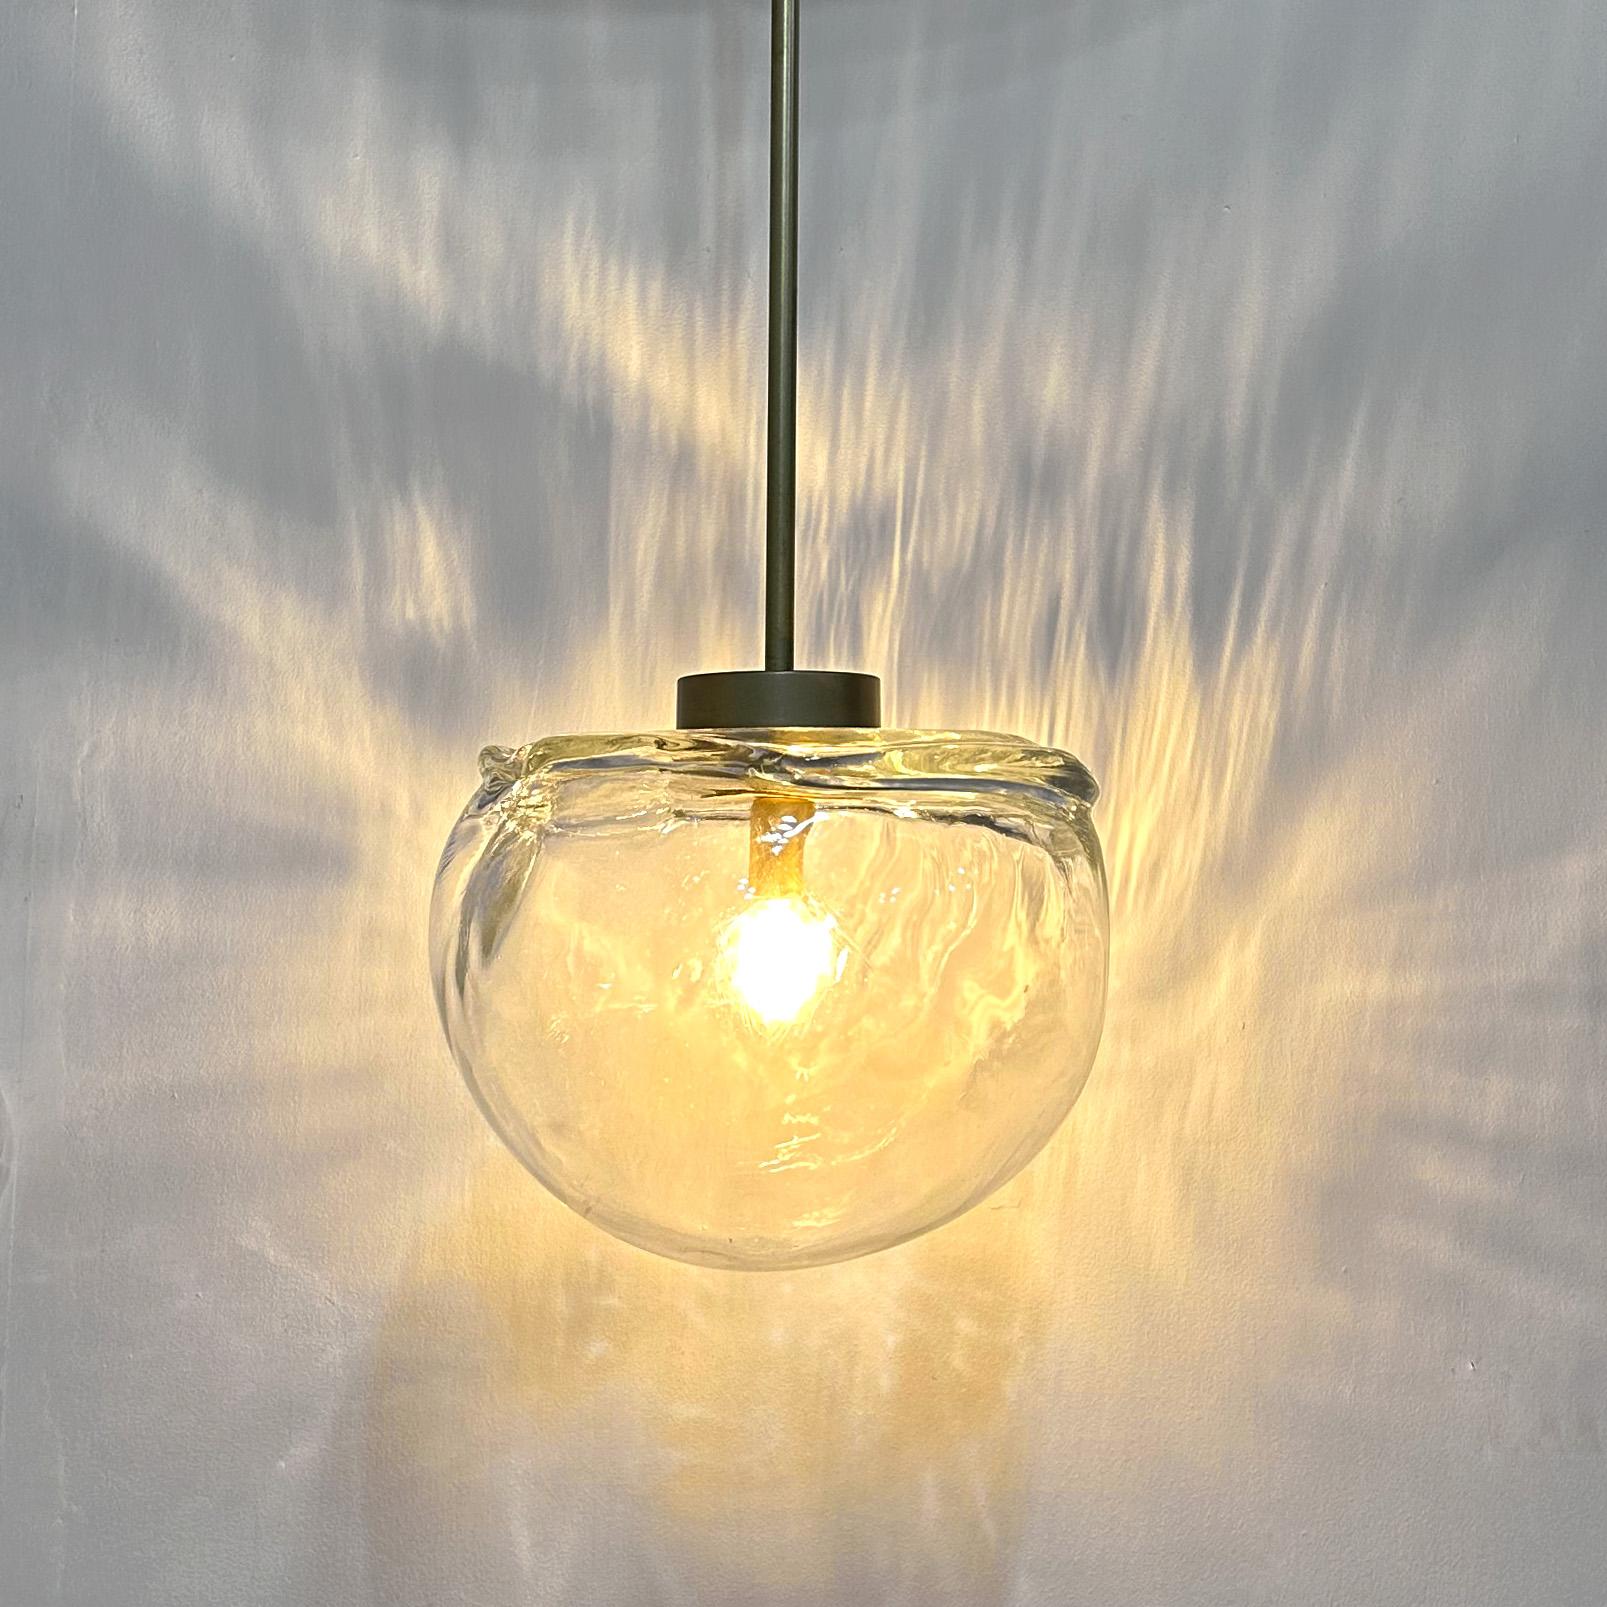 Beams of light radiate through this organic shaped orb and are cast onto surrounding surfaces. The pattern and texture of the hand-made glass is reminiscent of how water, stone and ice formations occur in nature.

SPECS
- Wired to UL standards
-